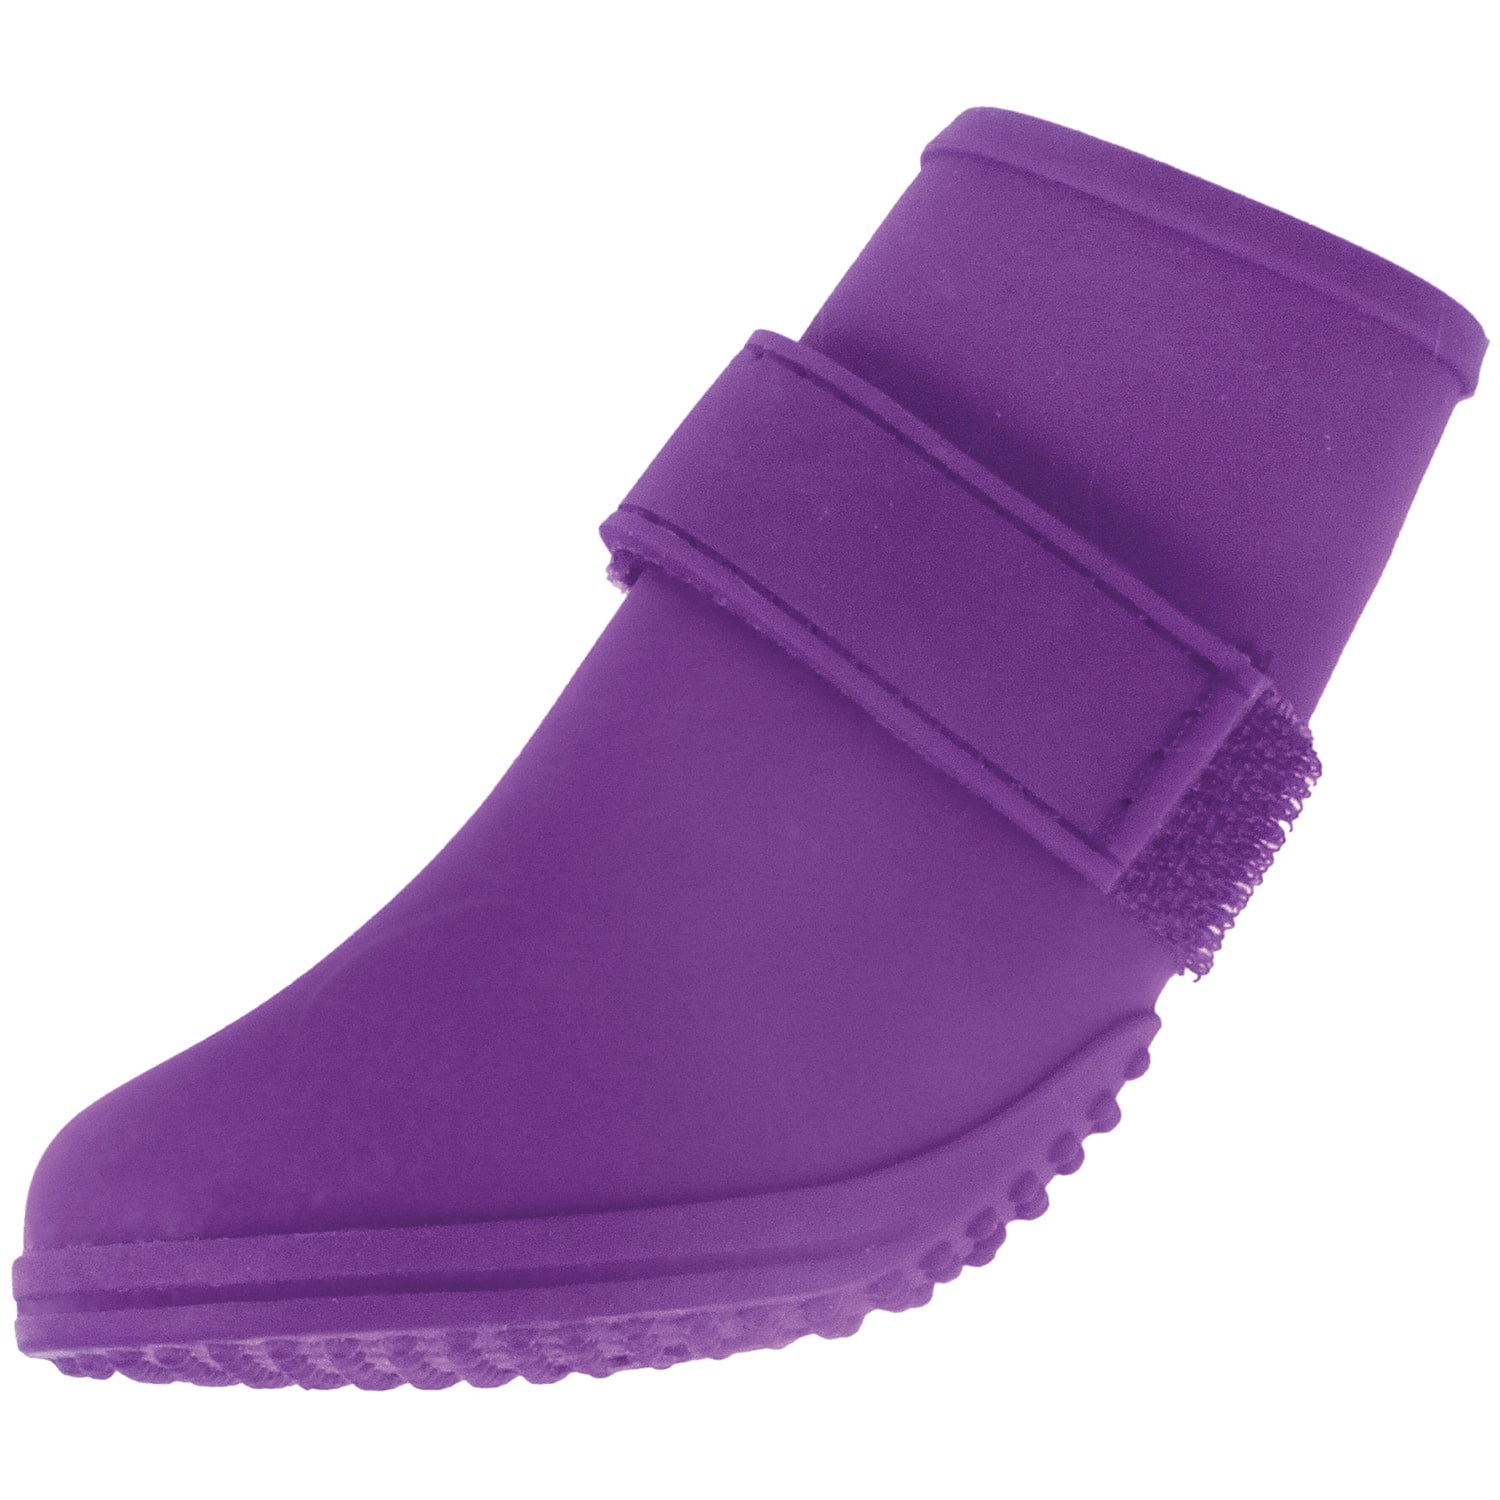 Jelly Wellies Boots Large 3"-Purple, Pk 1, Jelly Wellies - image 2 of 2